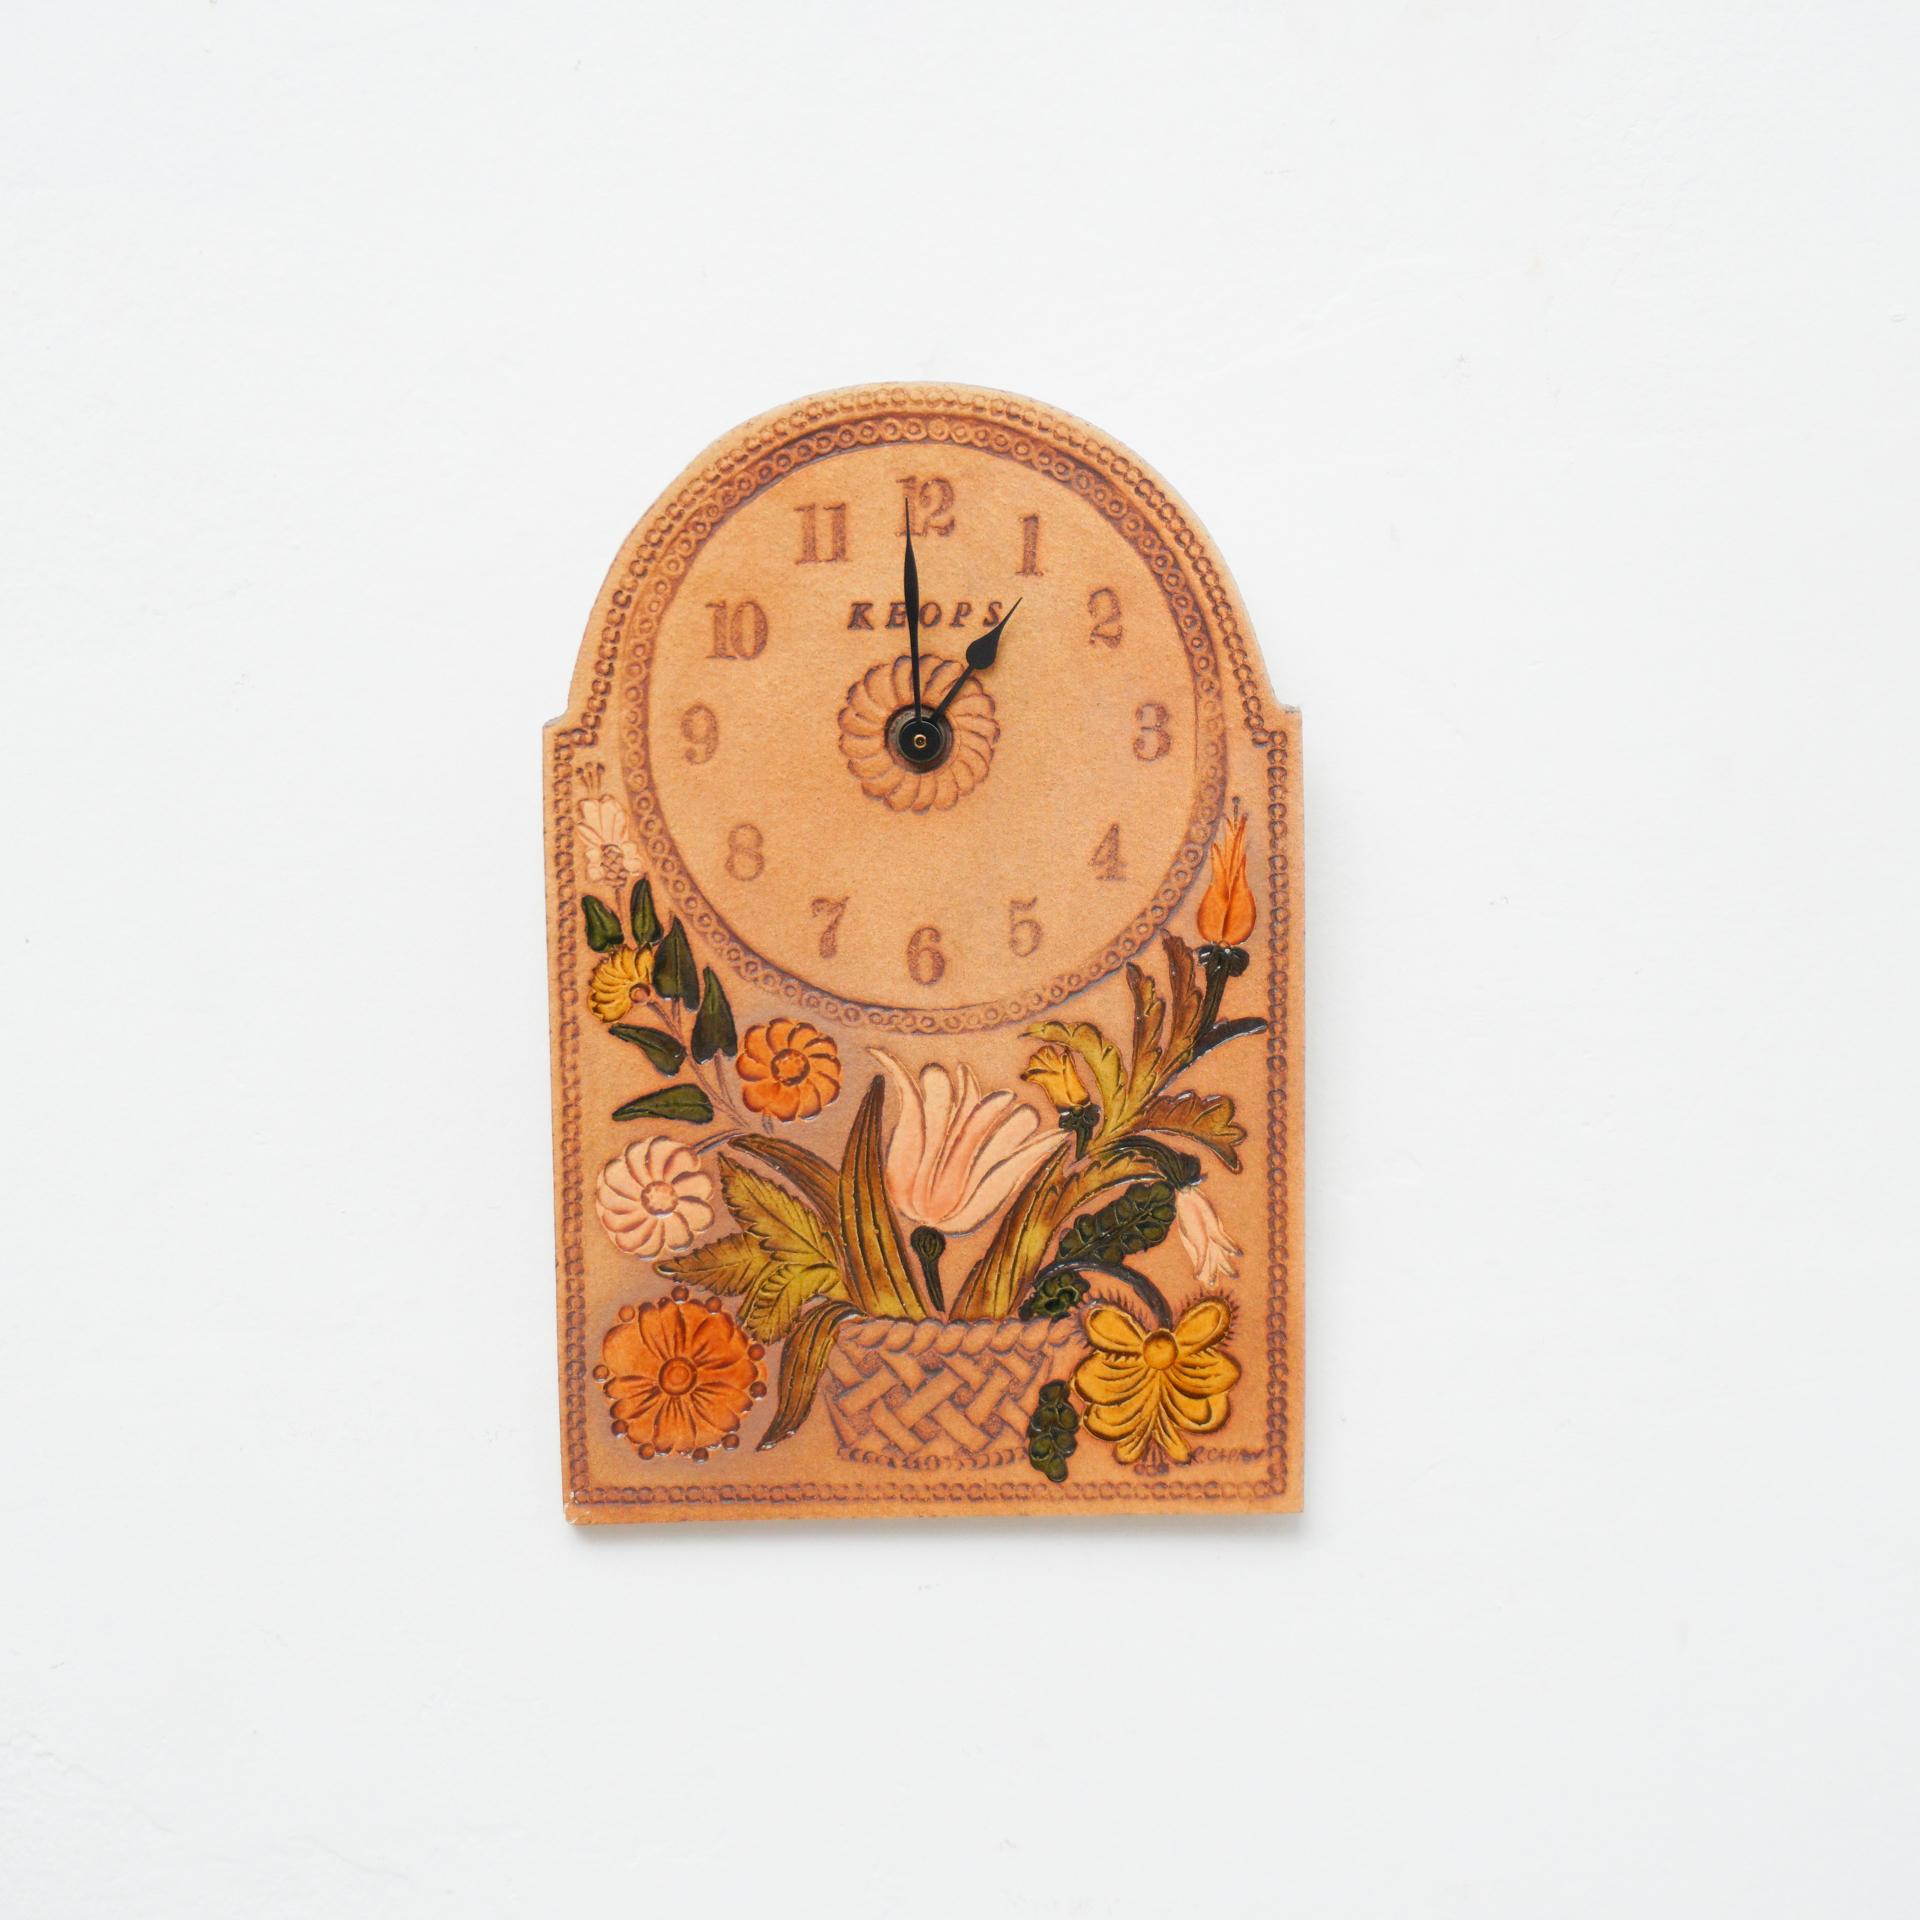 Roger Capron wall mounted ceramic clock, circa 1960
By Roger Capron, signed. (France)

In original condition with minor wear consistent of age and use, preserving a beautiful patina.